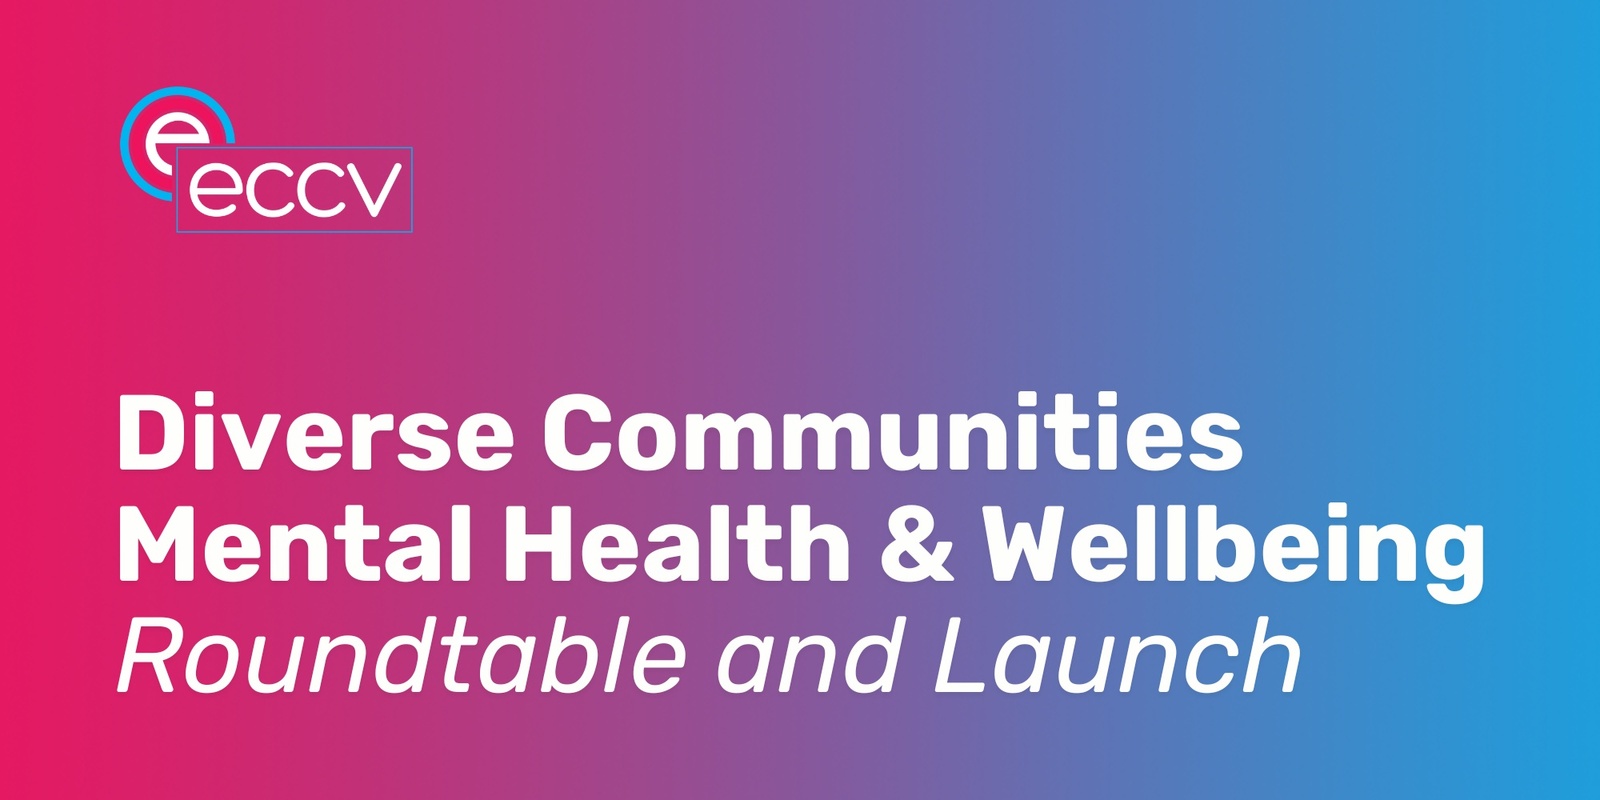 Banner image for Diverse Communities Mental Health & Wellbeing Roundtable and Launch